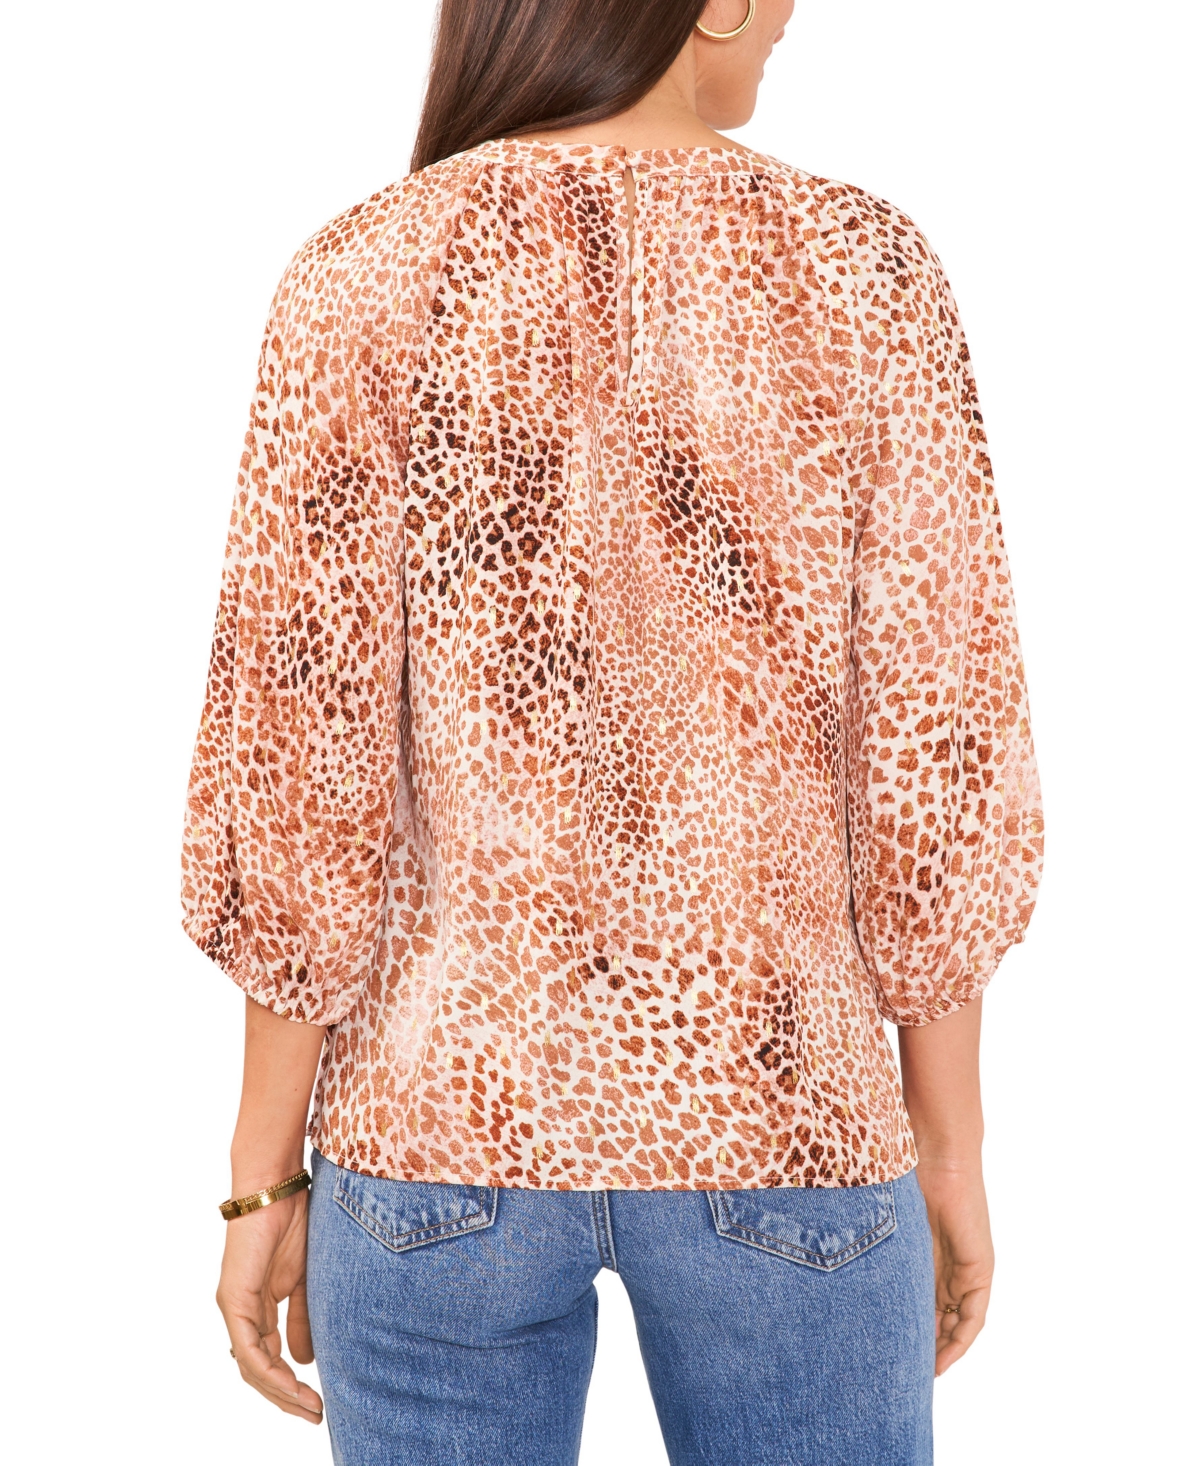 Shop Vince Camuto Women's Metallic Animal Print Keyhole Peasant Blouse In Natural Taupe